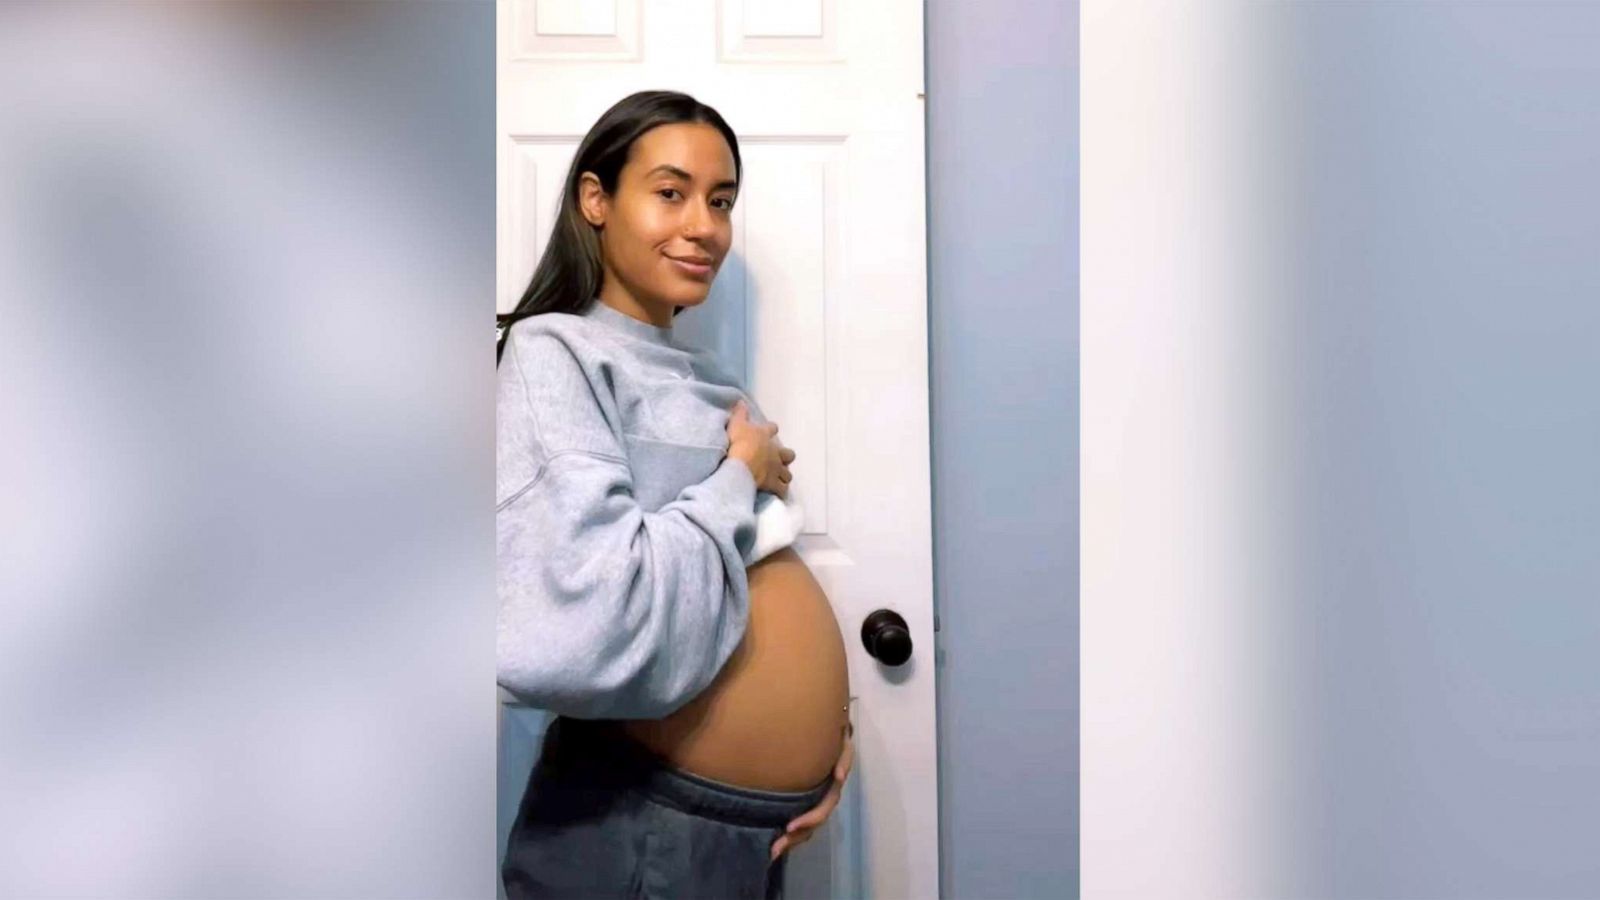 Woman shares health warning on TikTok after doctors find 10-pound ovarian cyst